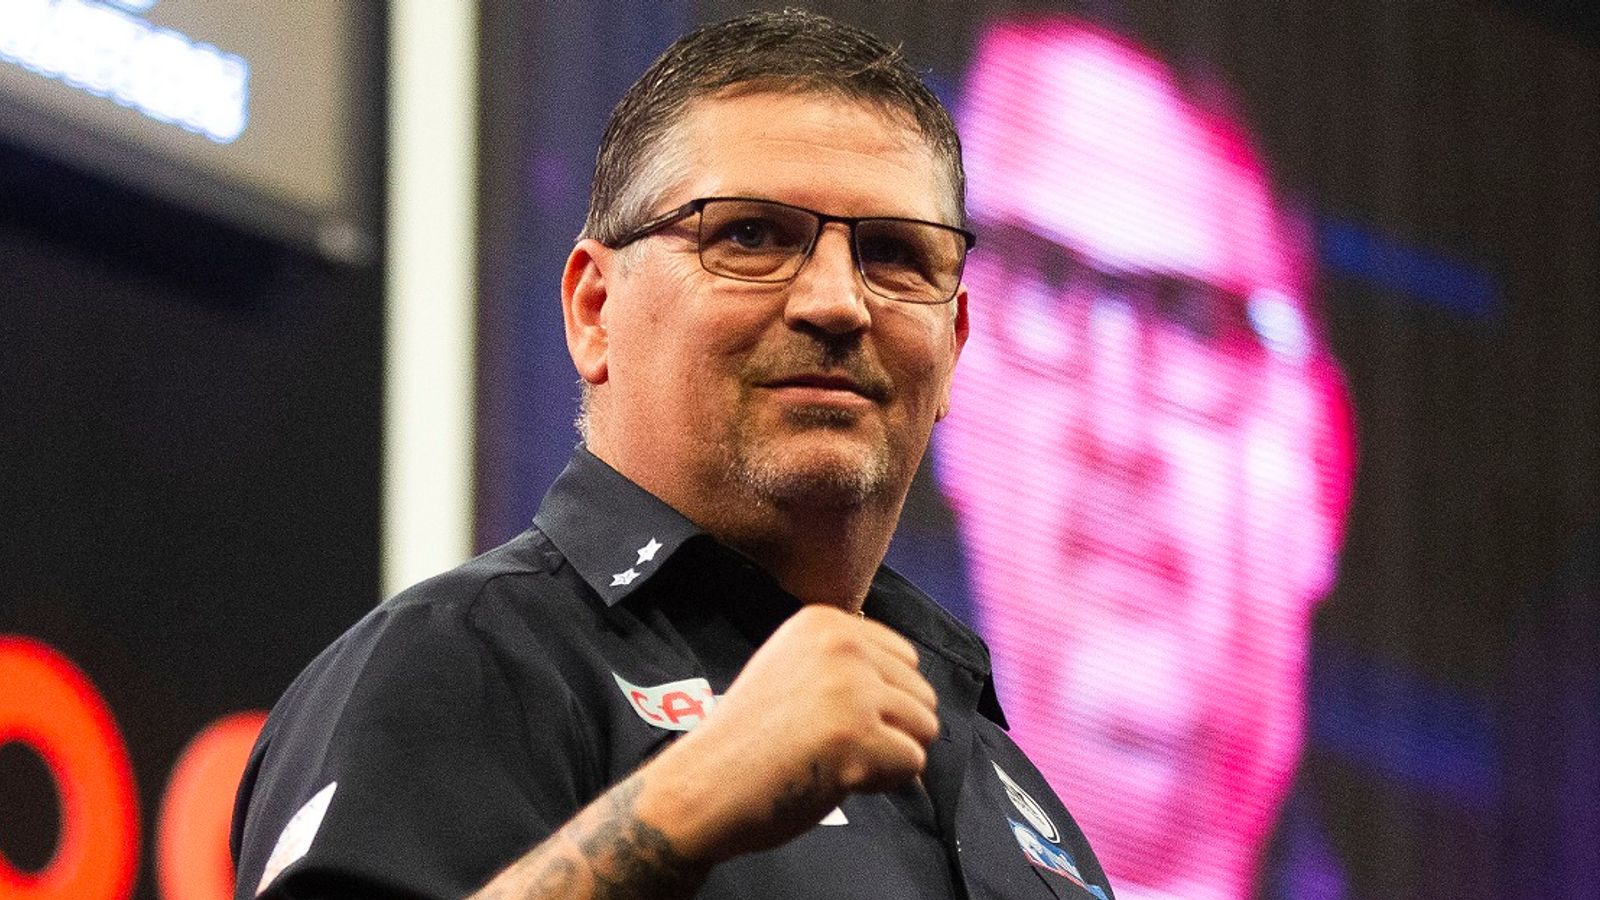 World Matchplay Darts: Gary Anderson, Michael Smith in action with Michael van Gerwen playing Adrian Lewis tonight